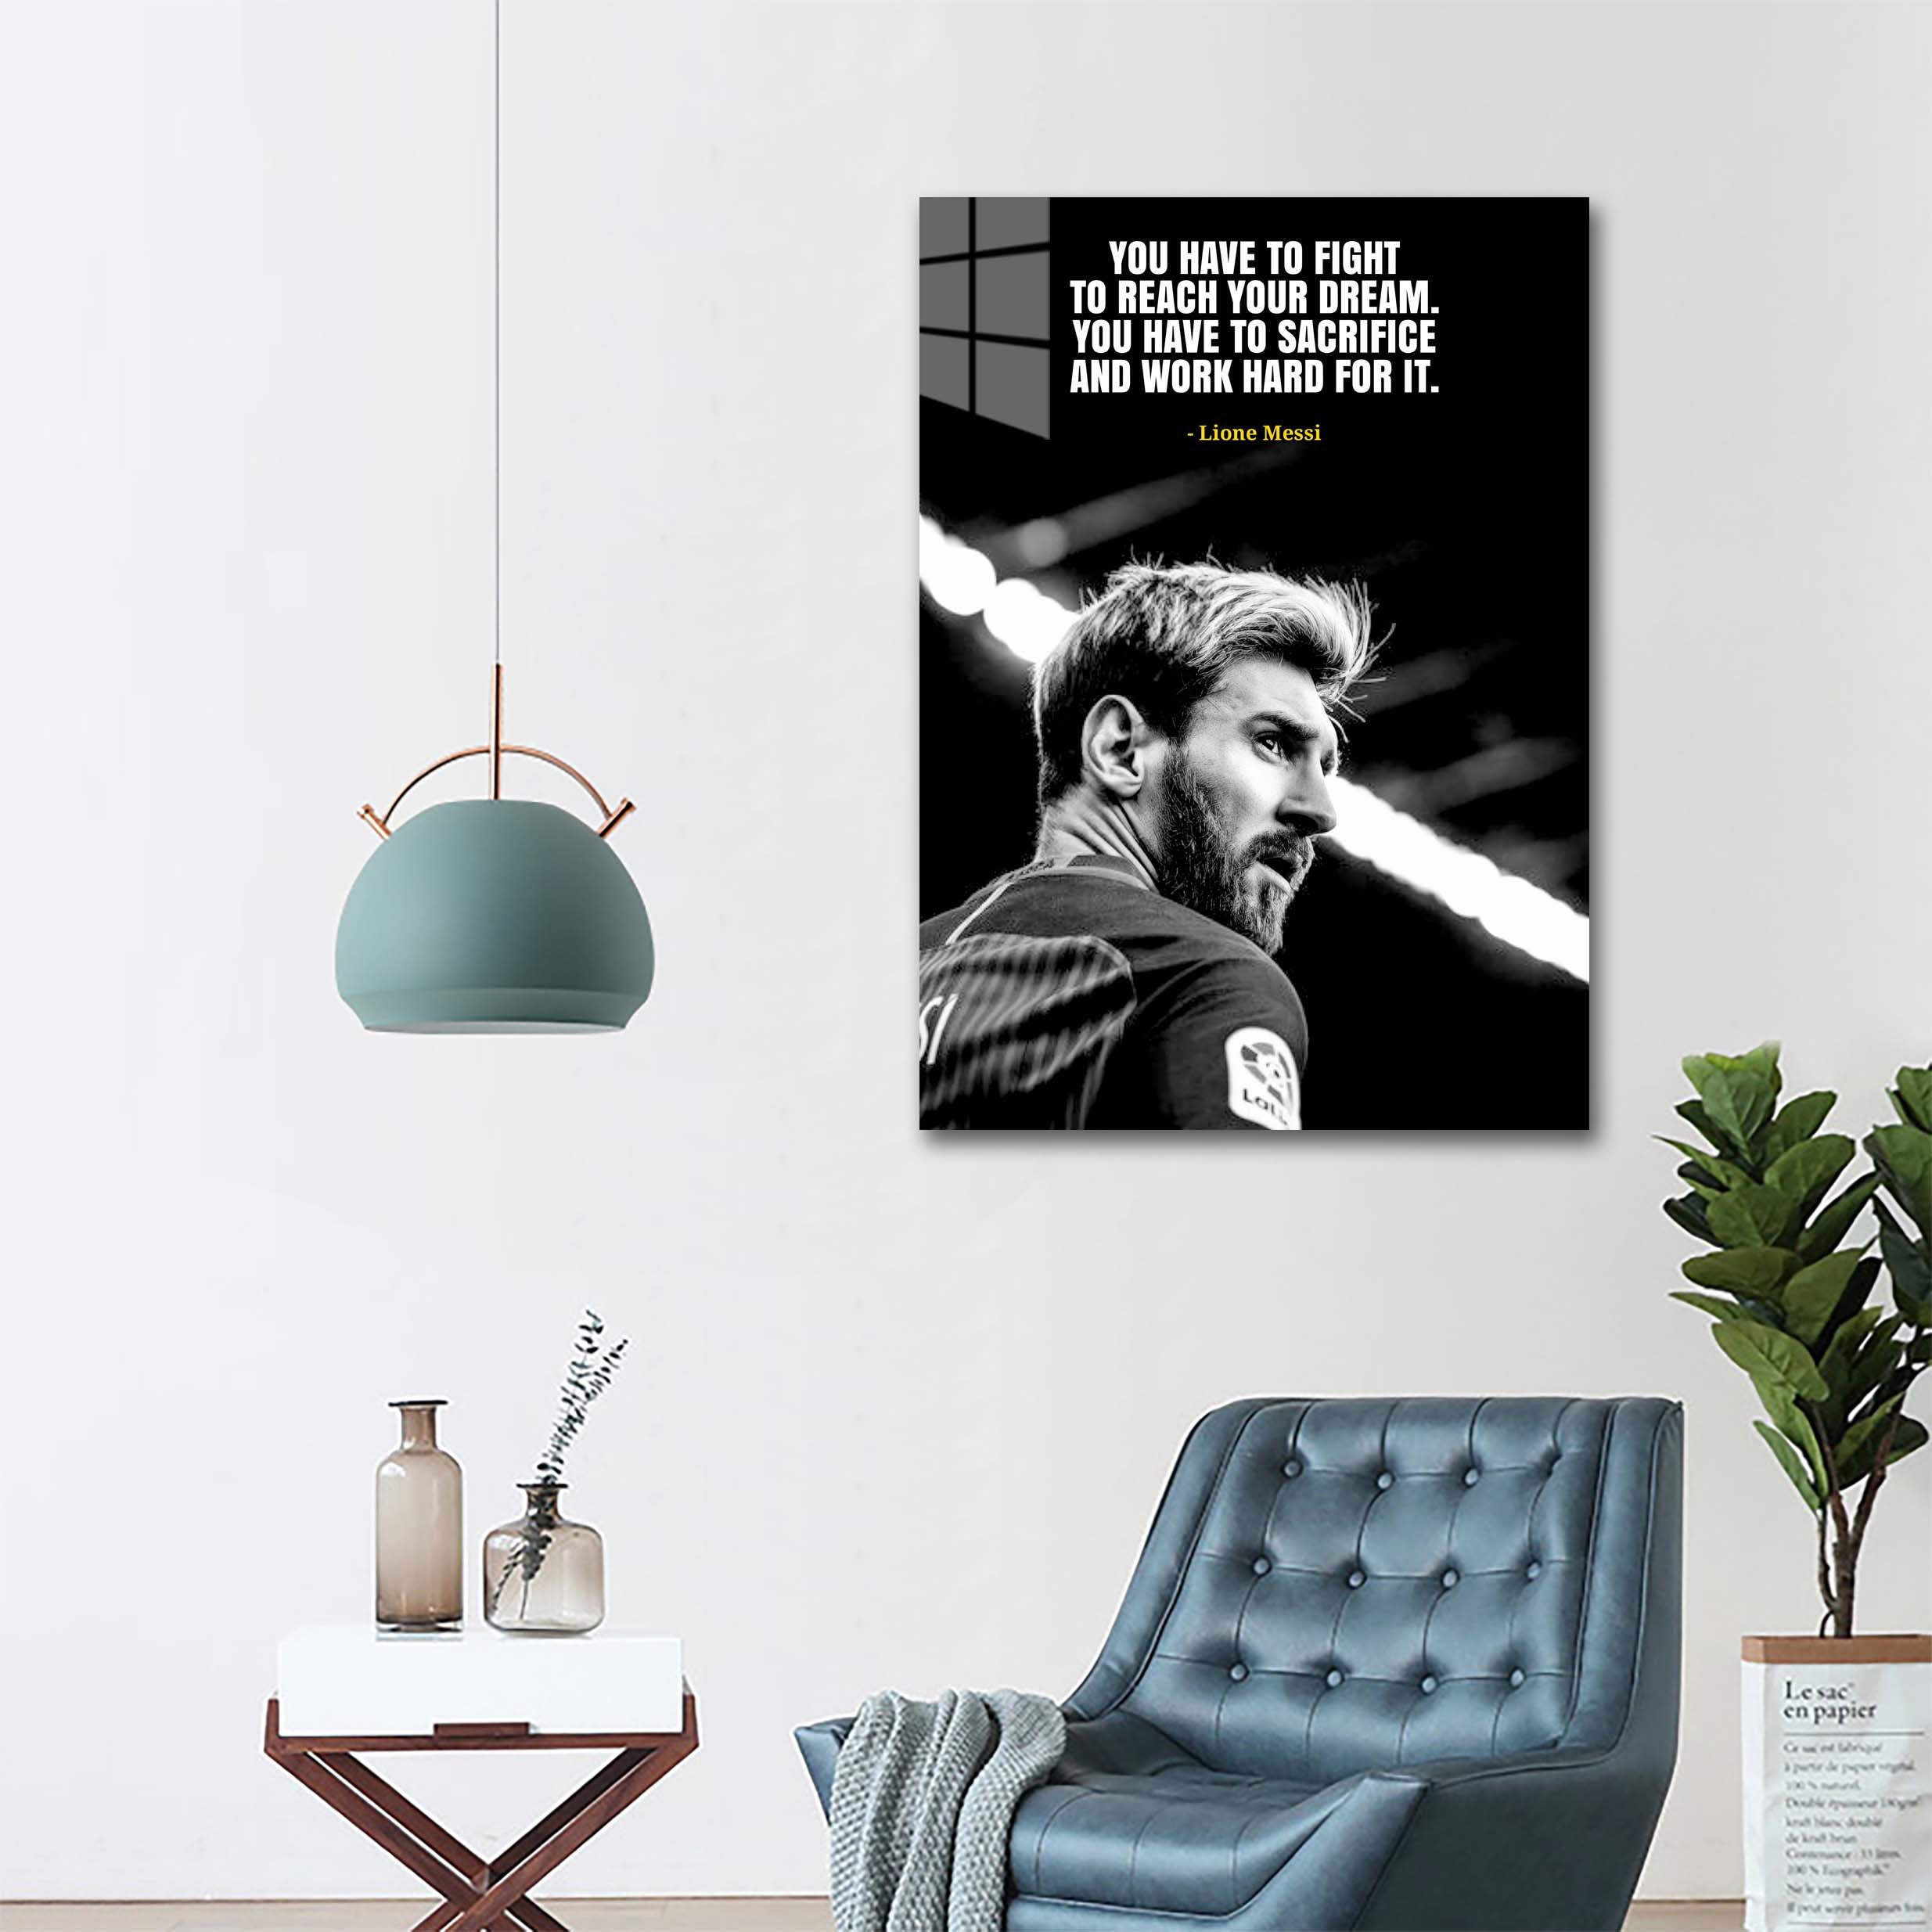 Messi quotes  -designed by @Dayo Art